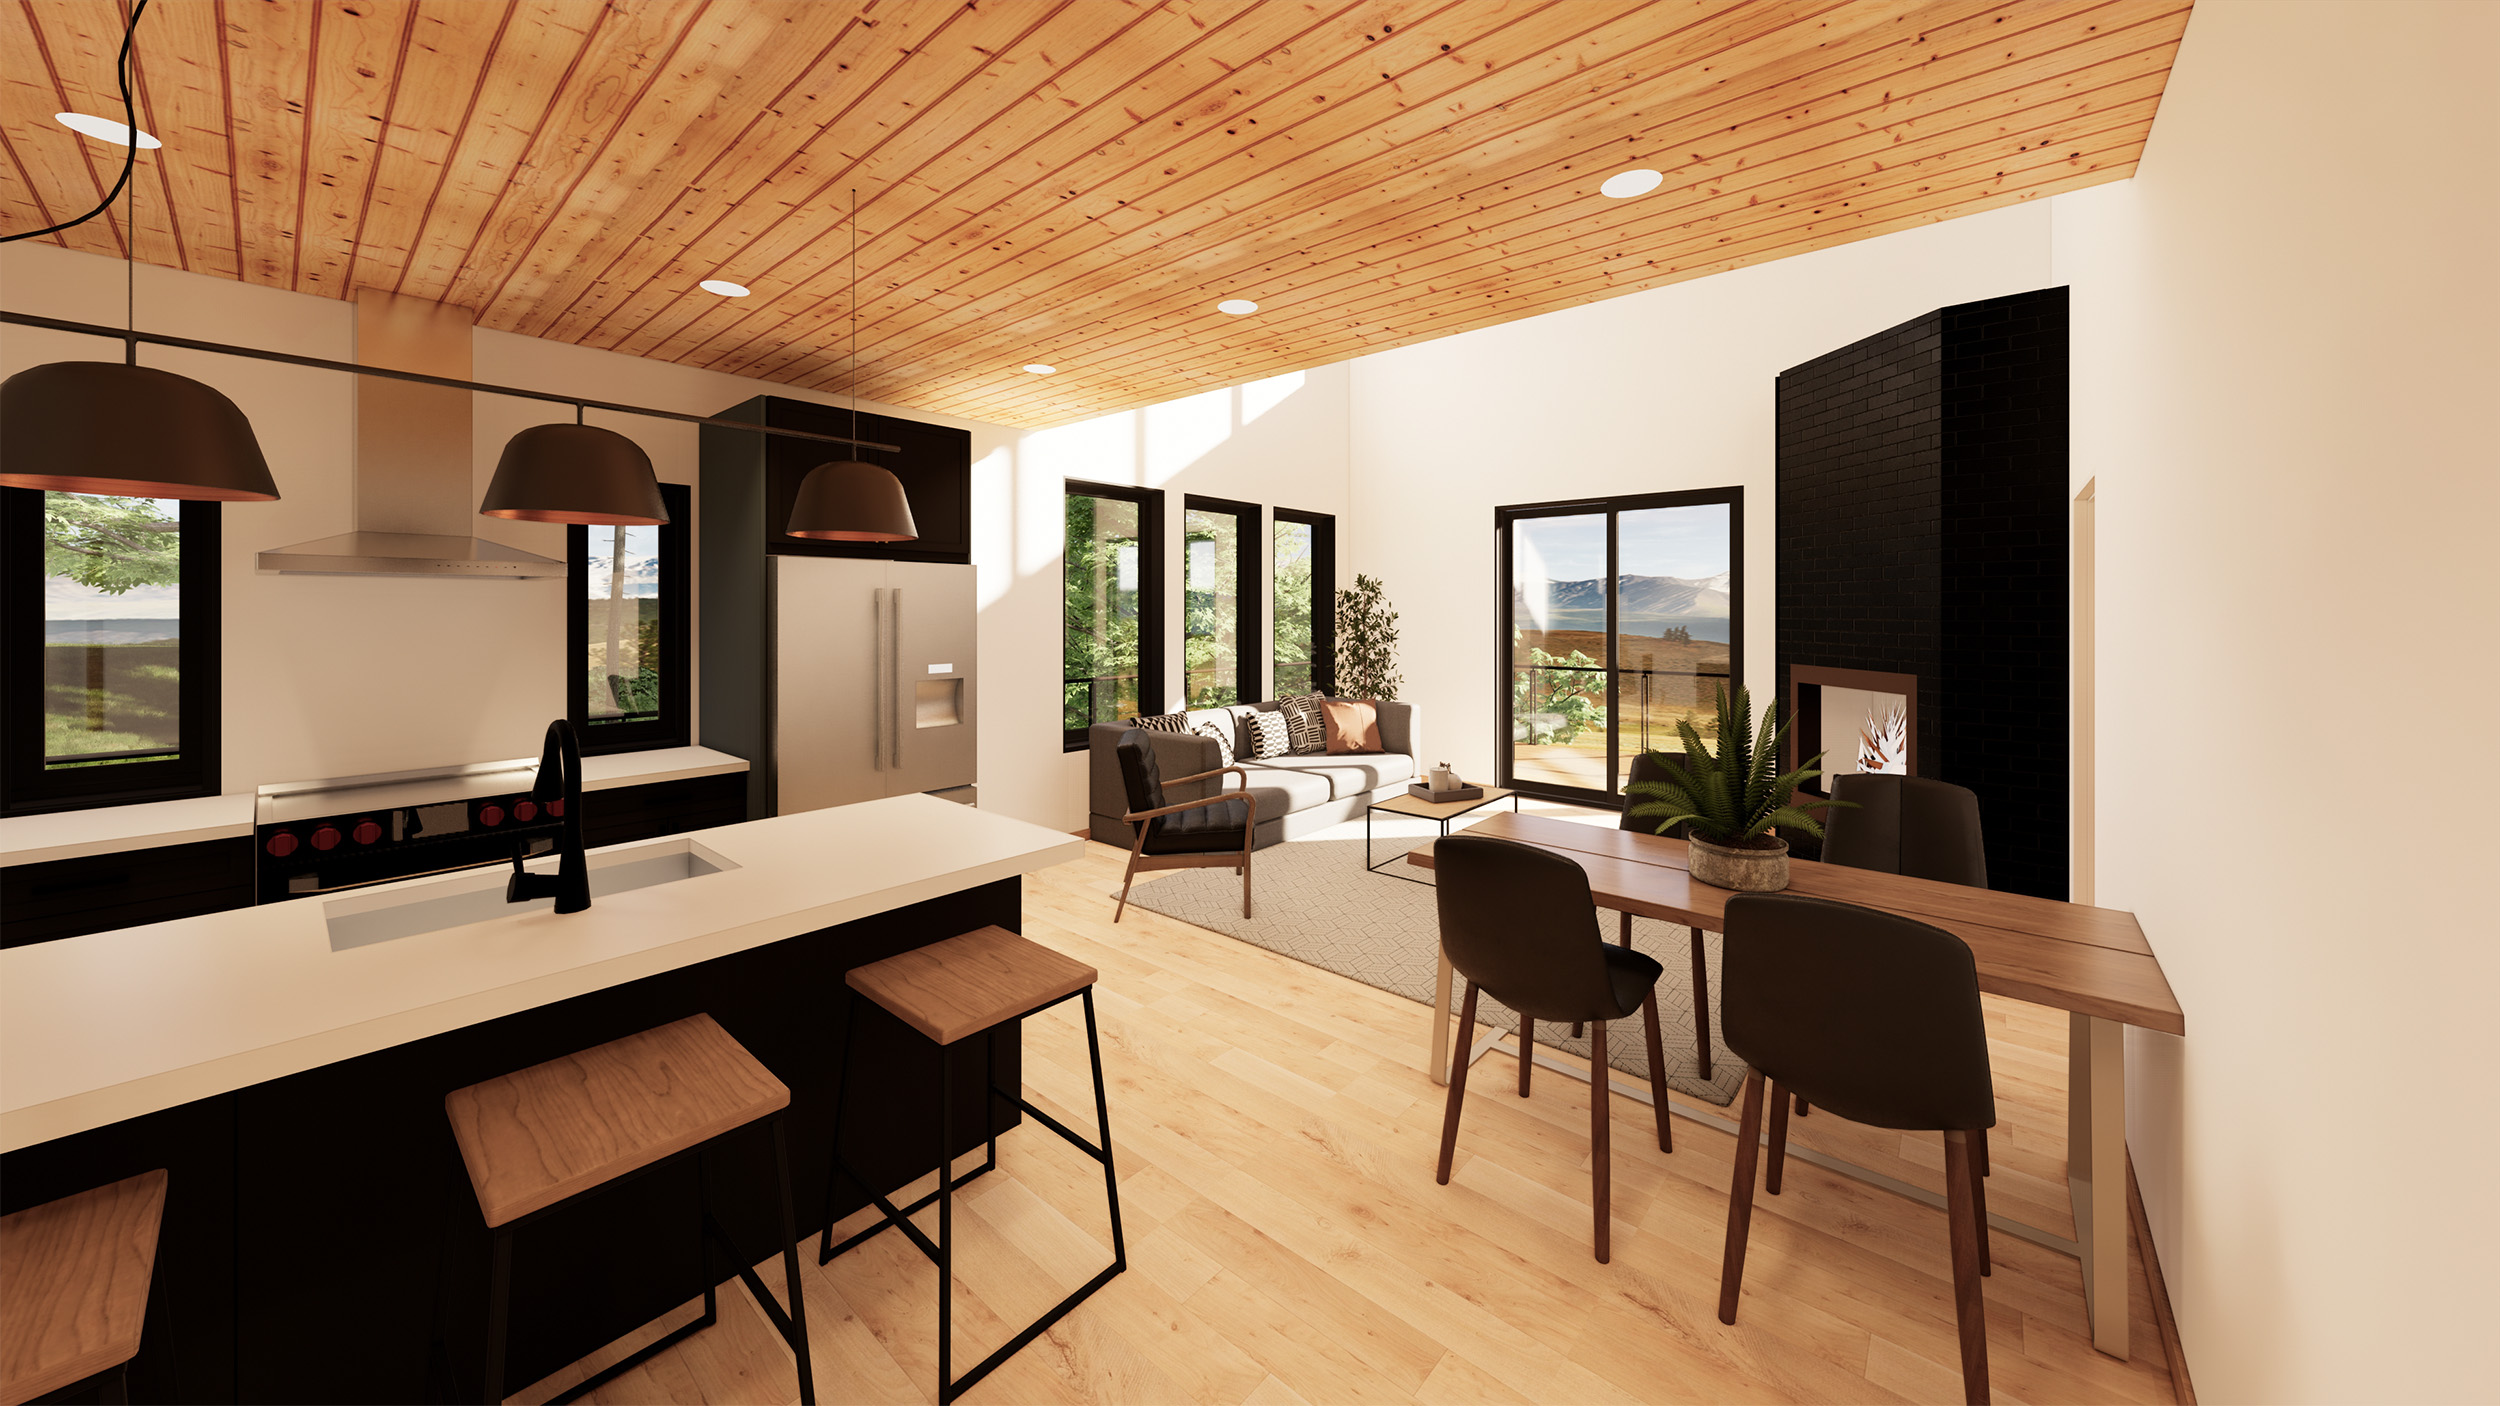 Mock up of the interior of the 3 bedroom cabin in The Lodges at Reedmont.